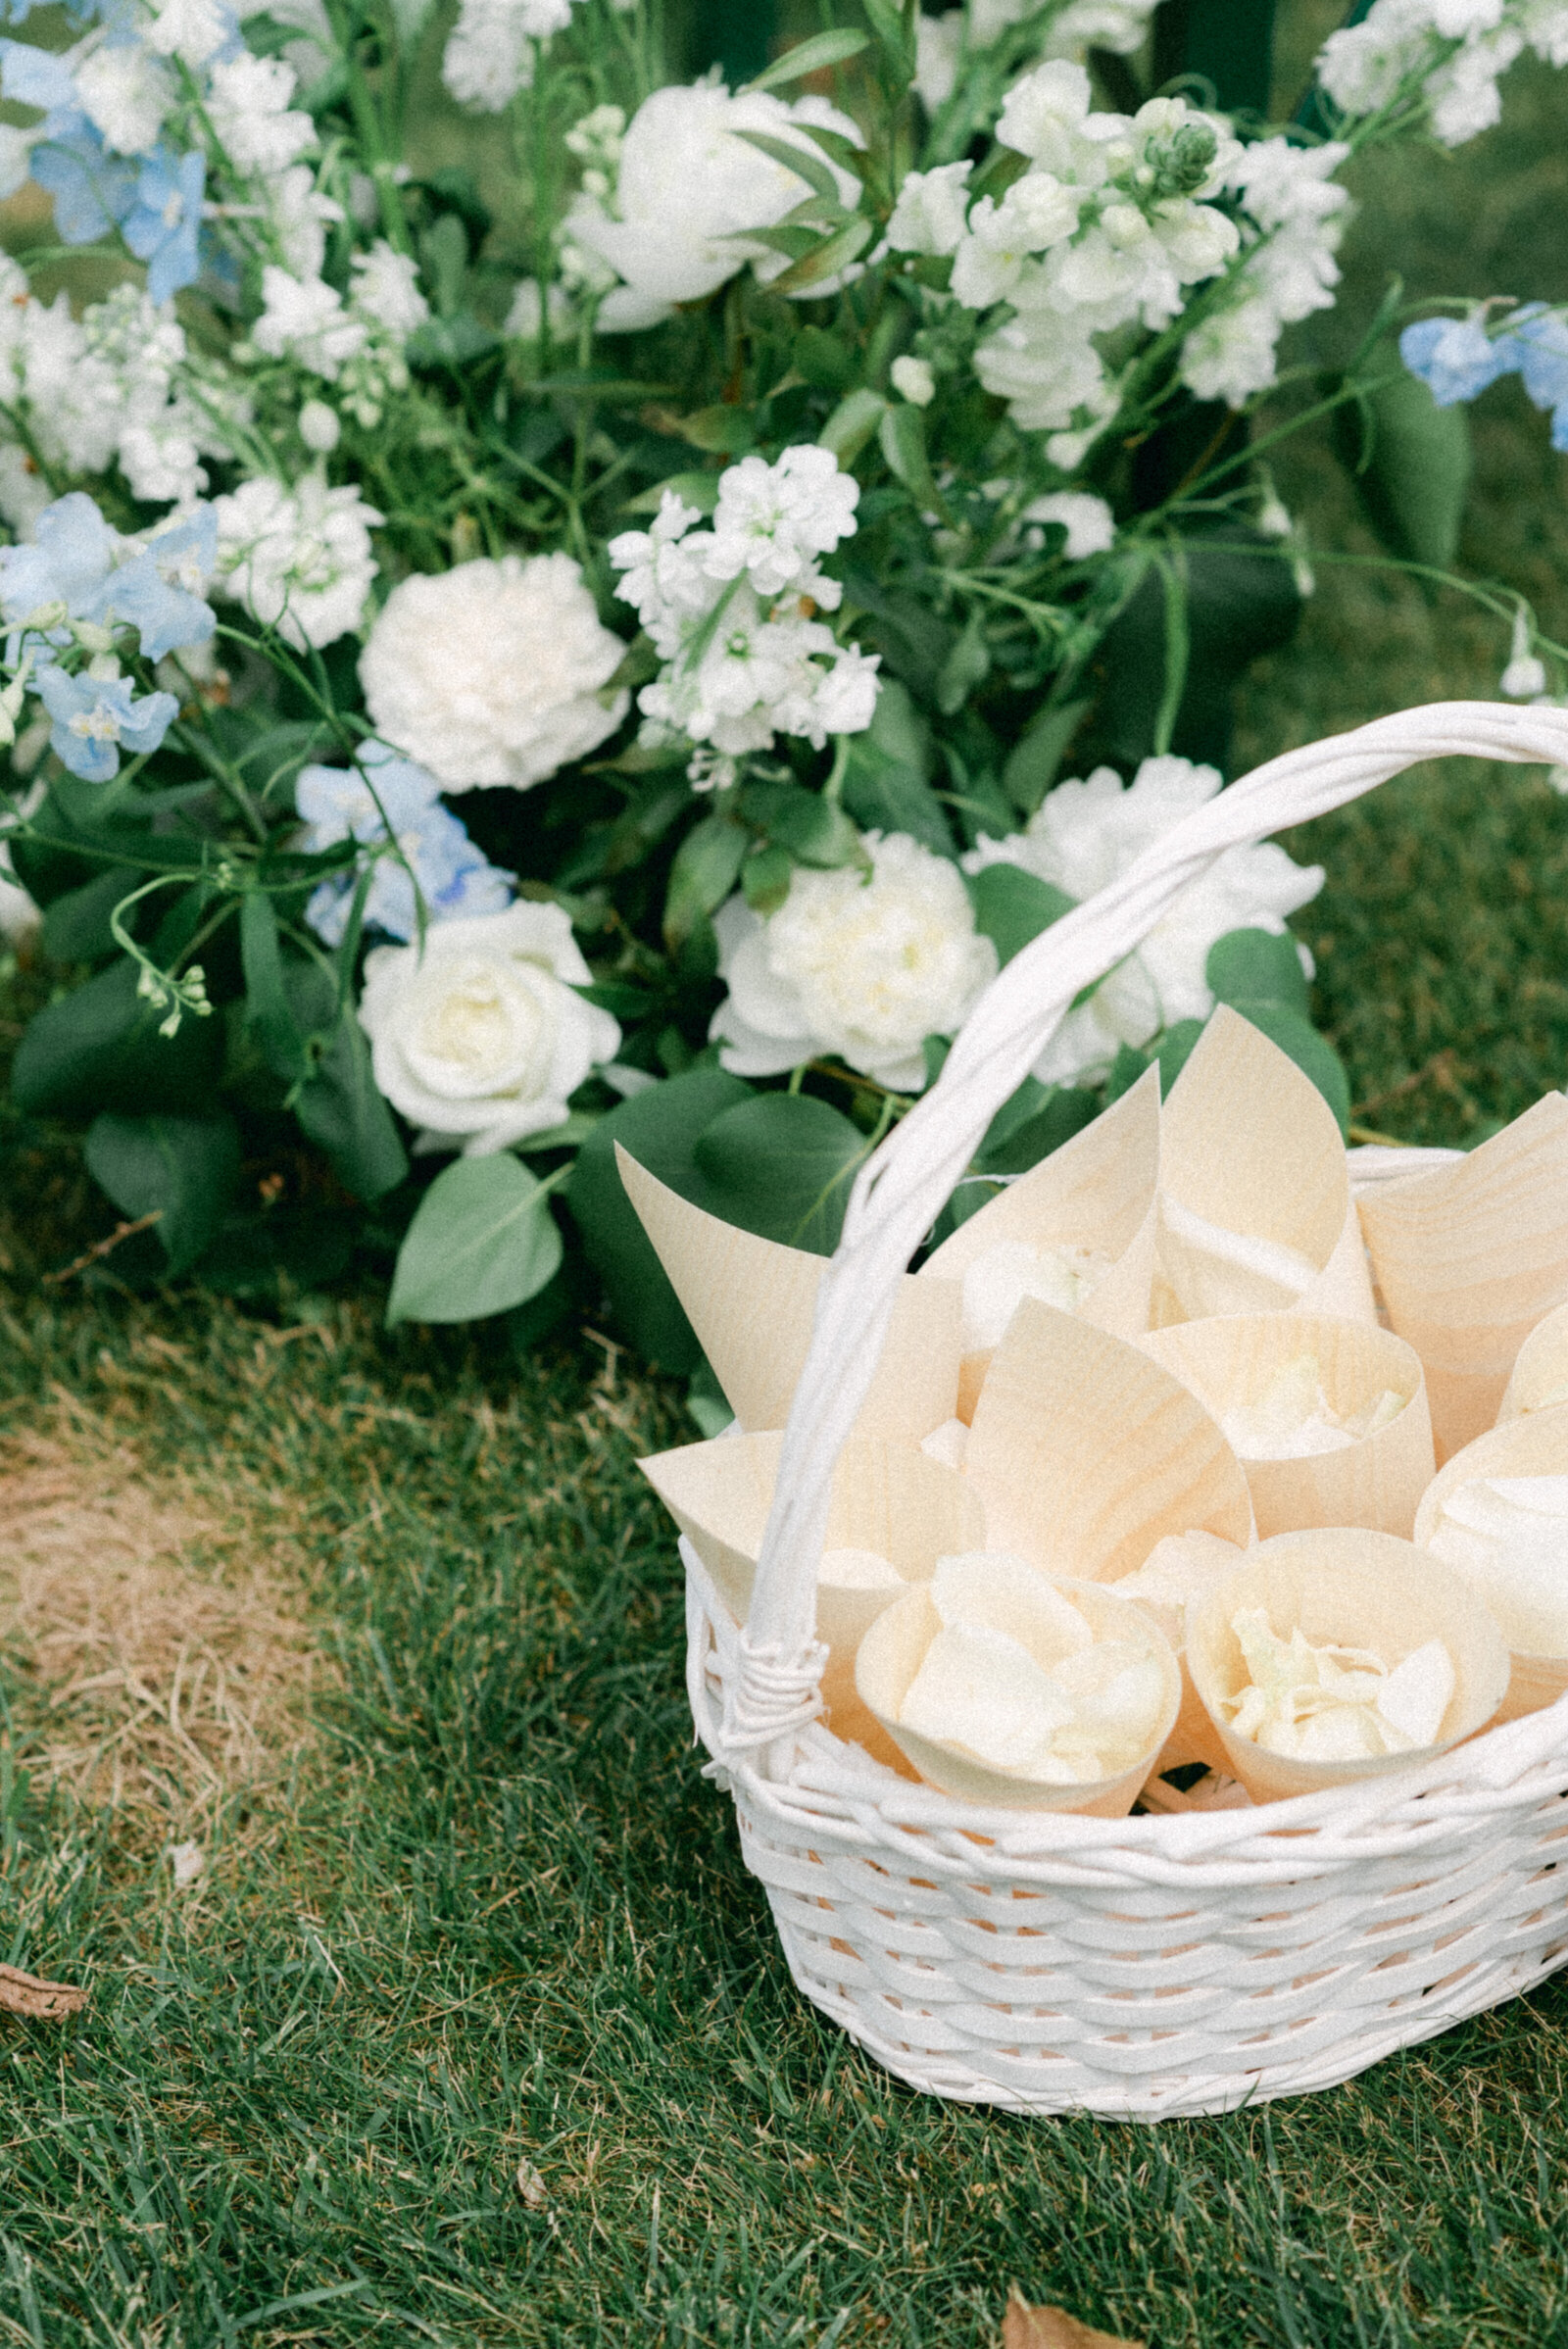 Rose petals in a basket photographed by wedding photographer Hannika Gabrielsson.